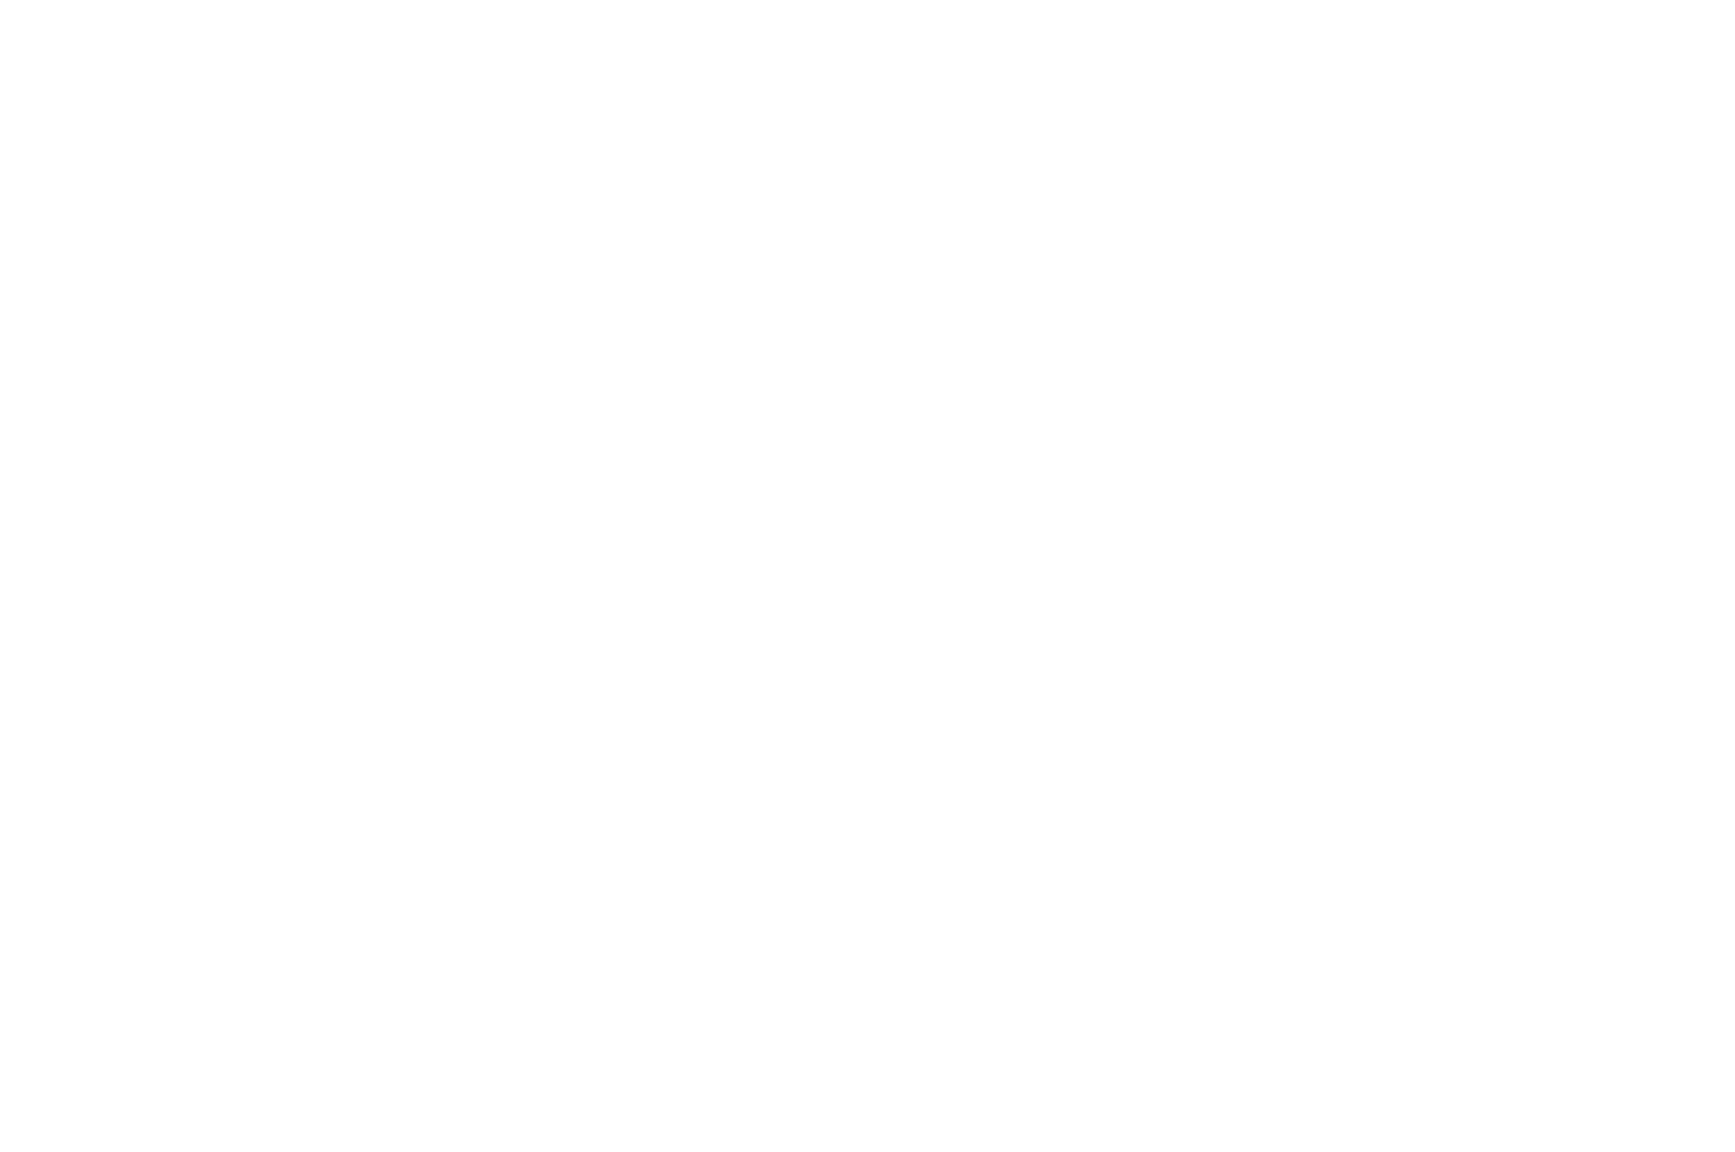 OFFICIAL SELECTION – Arpa International Film festival – 2020